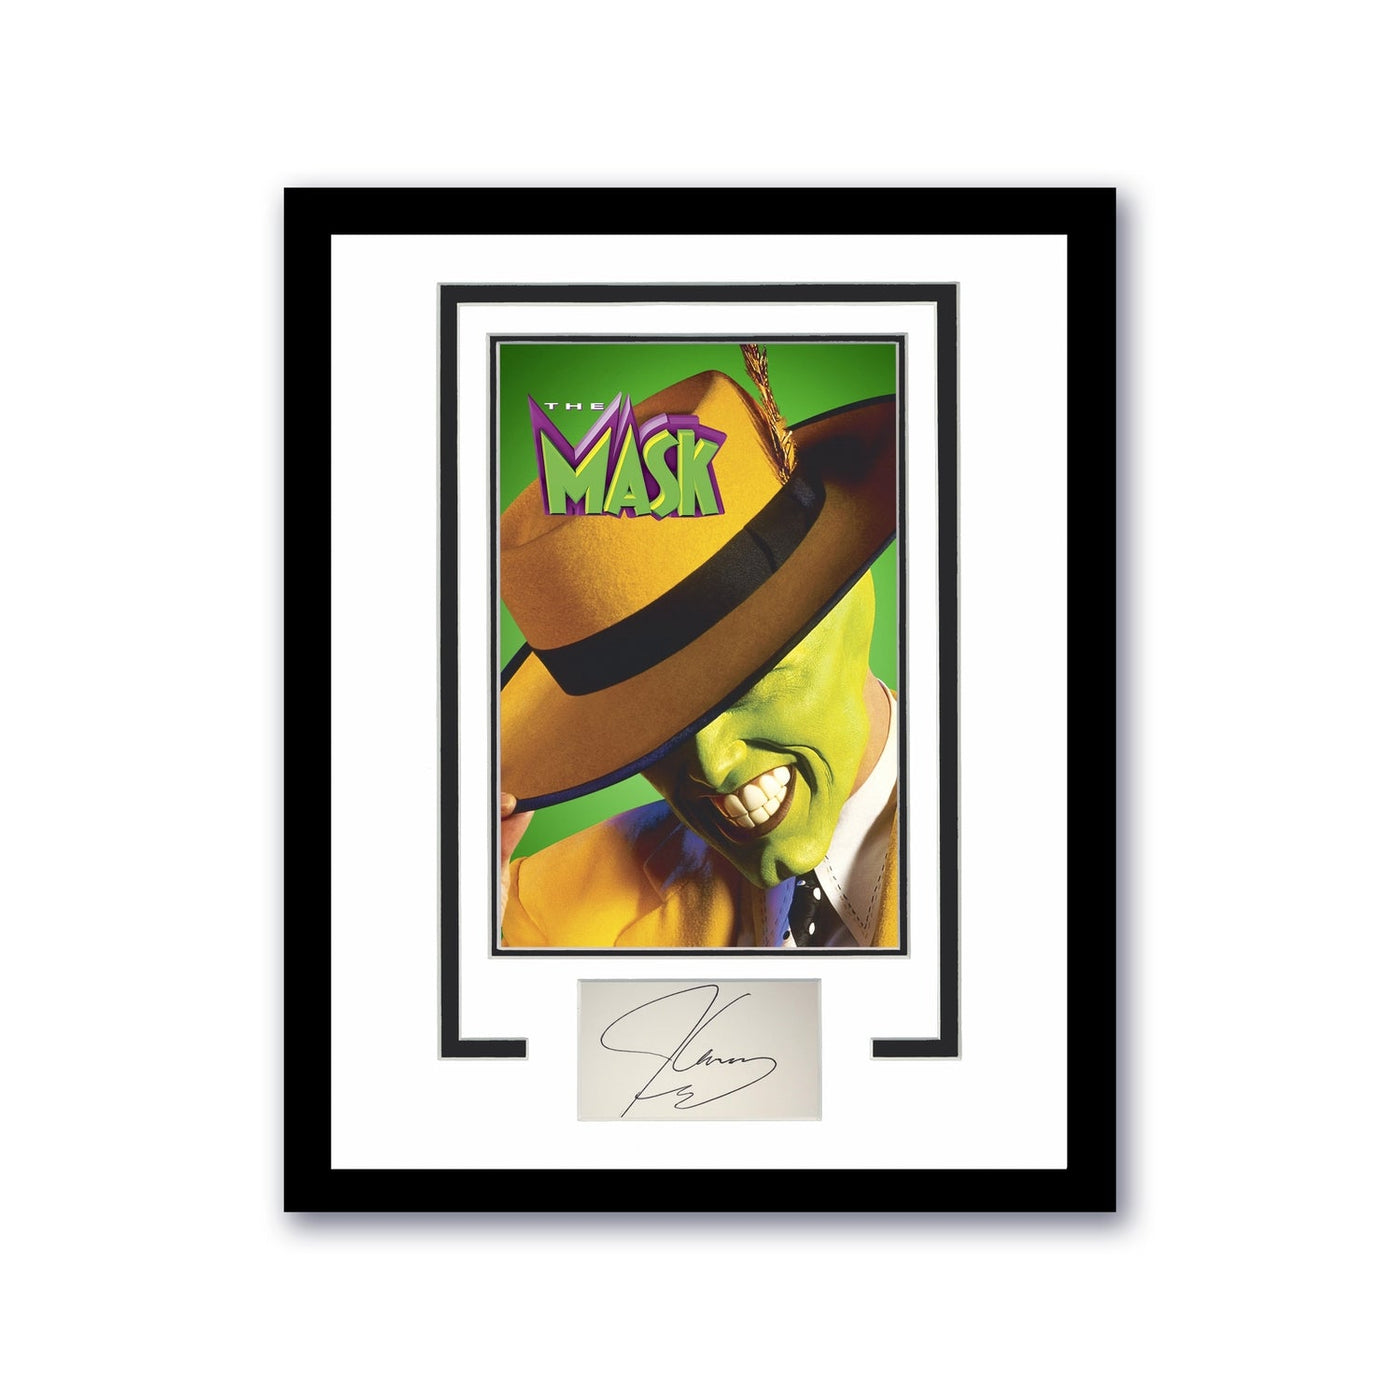 The Mask Jim Carrey Autographed Signed 11x14 Framed Poster Photo ACOA